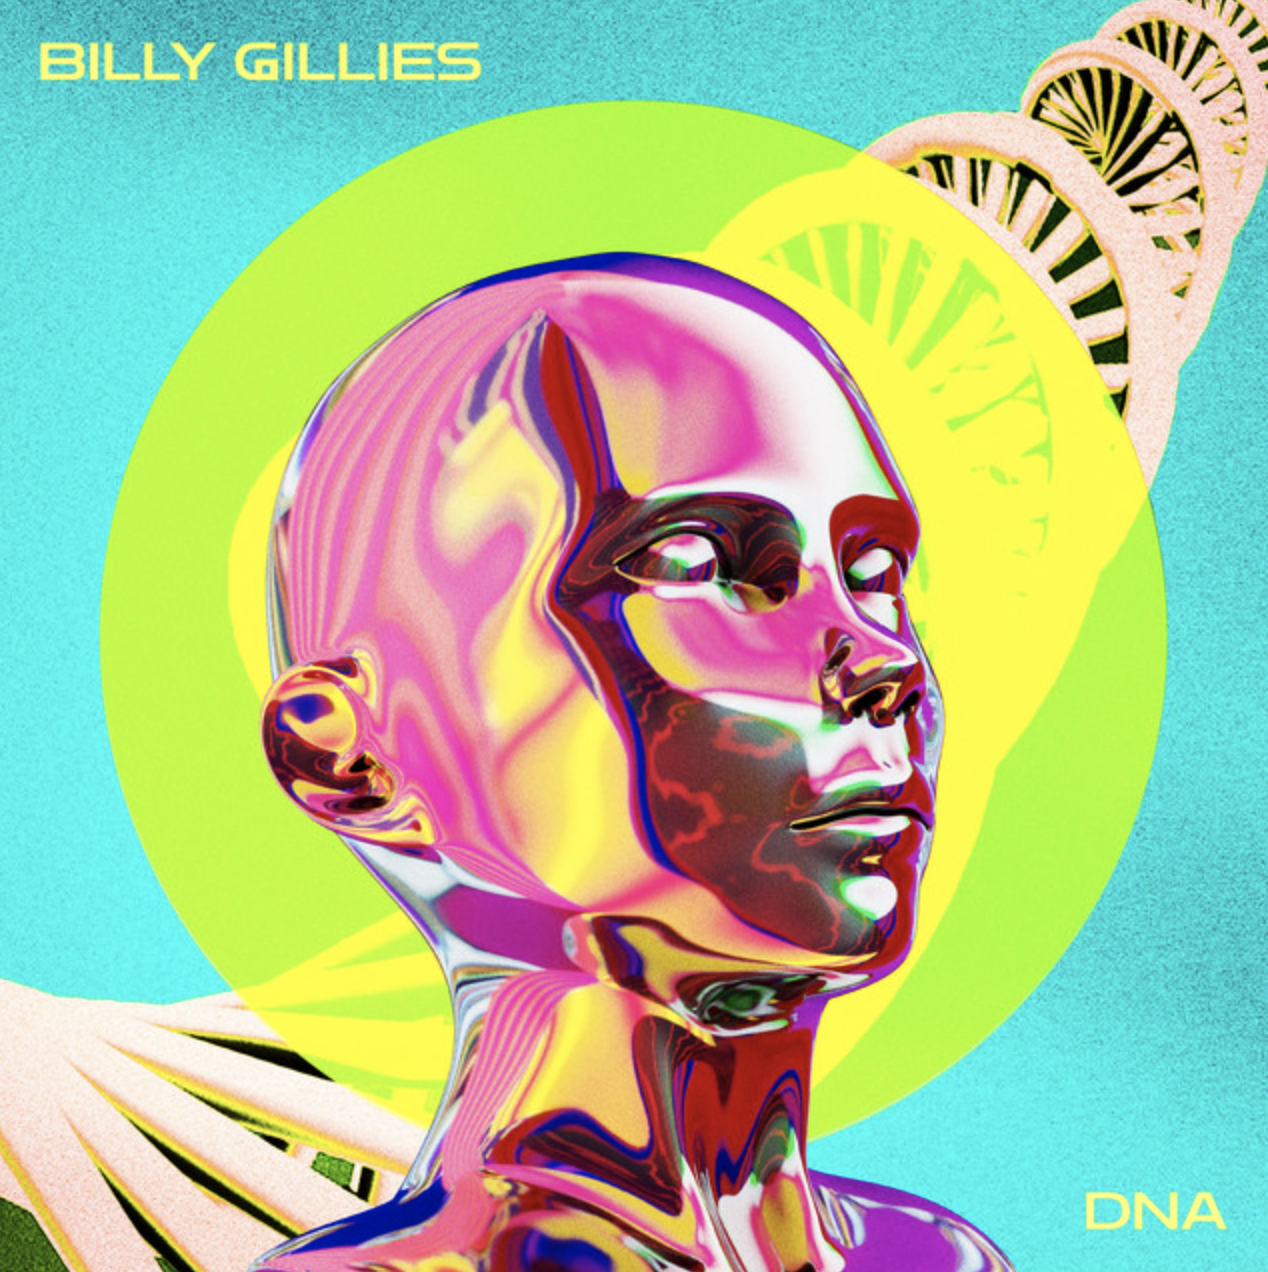 Billy Gillies